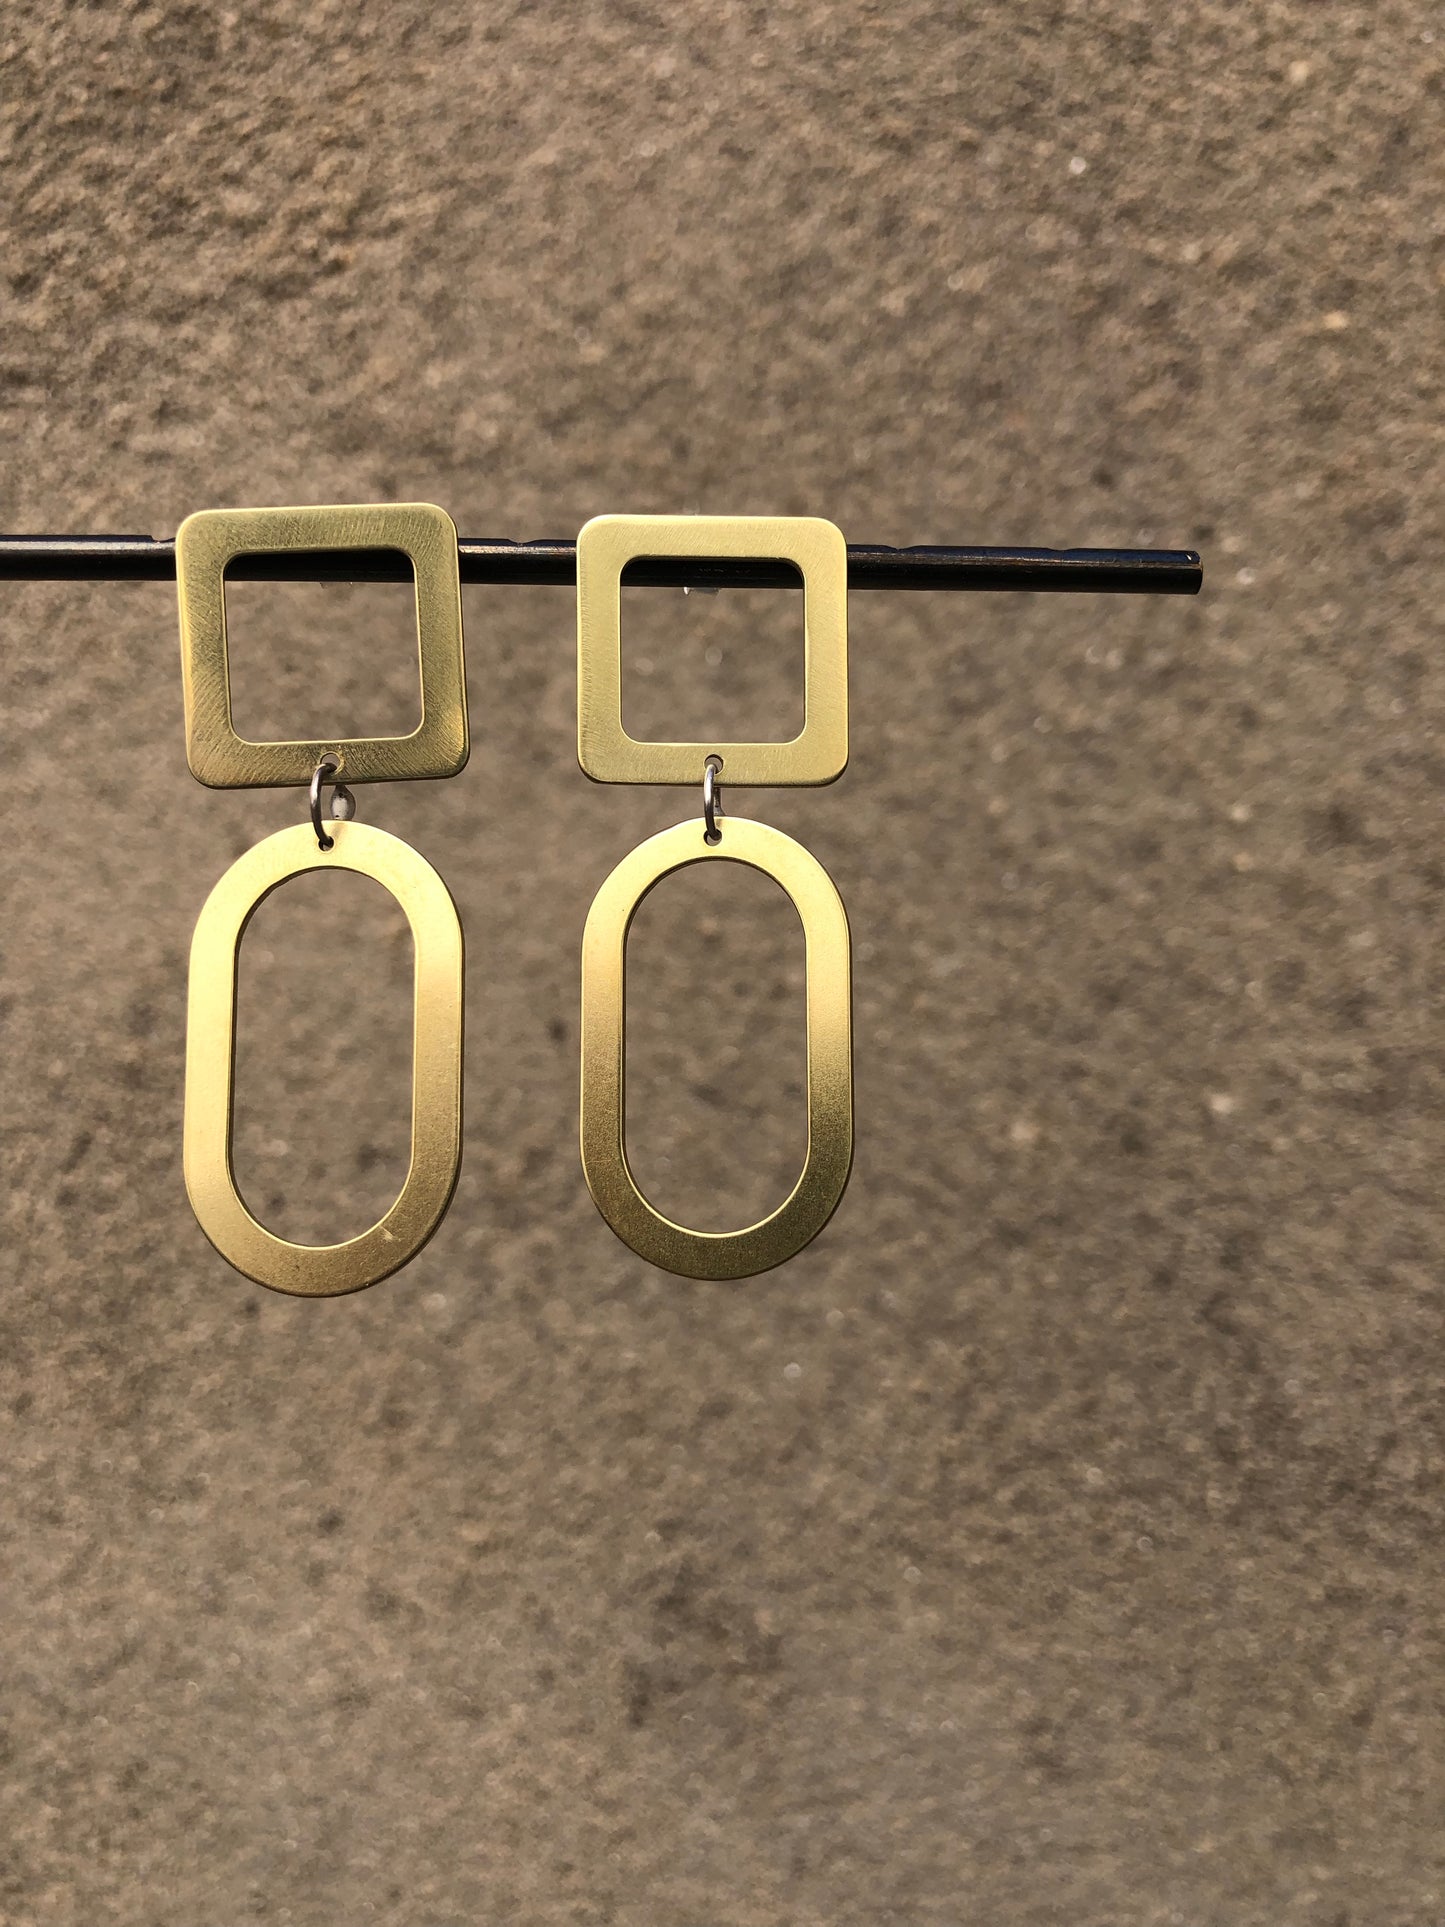 Square + Oval Earrings